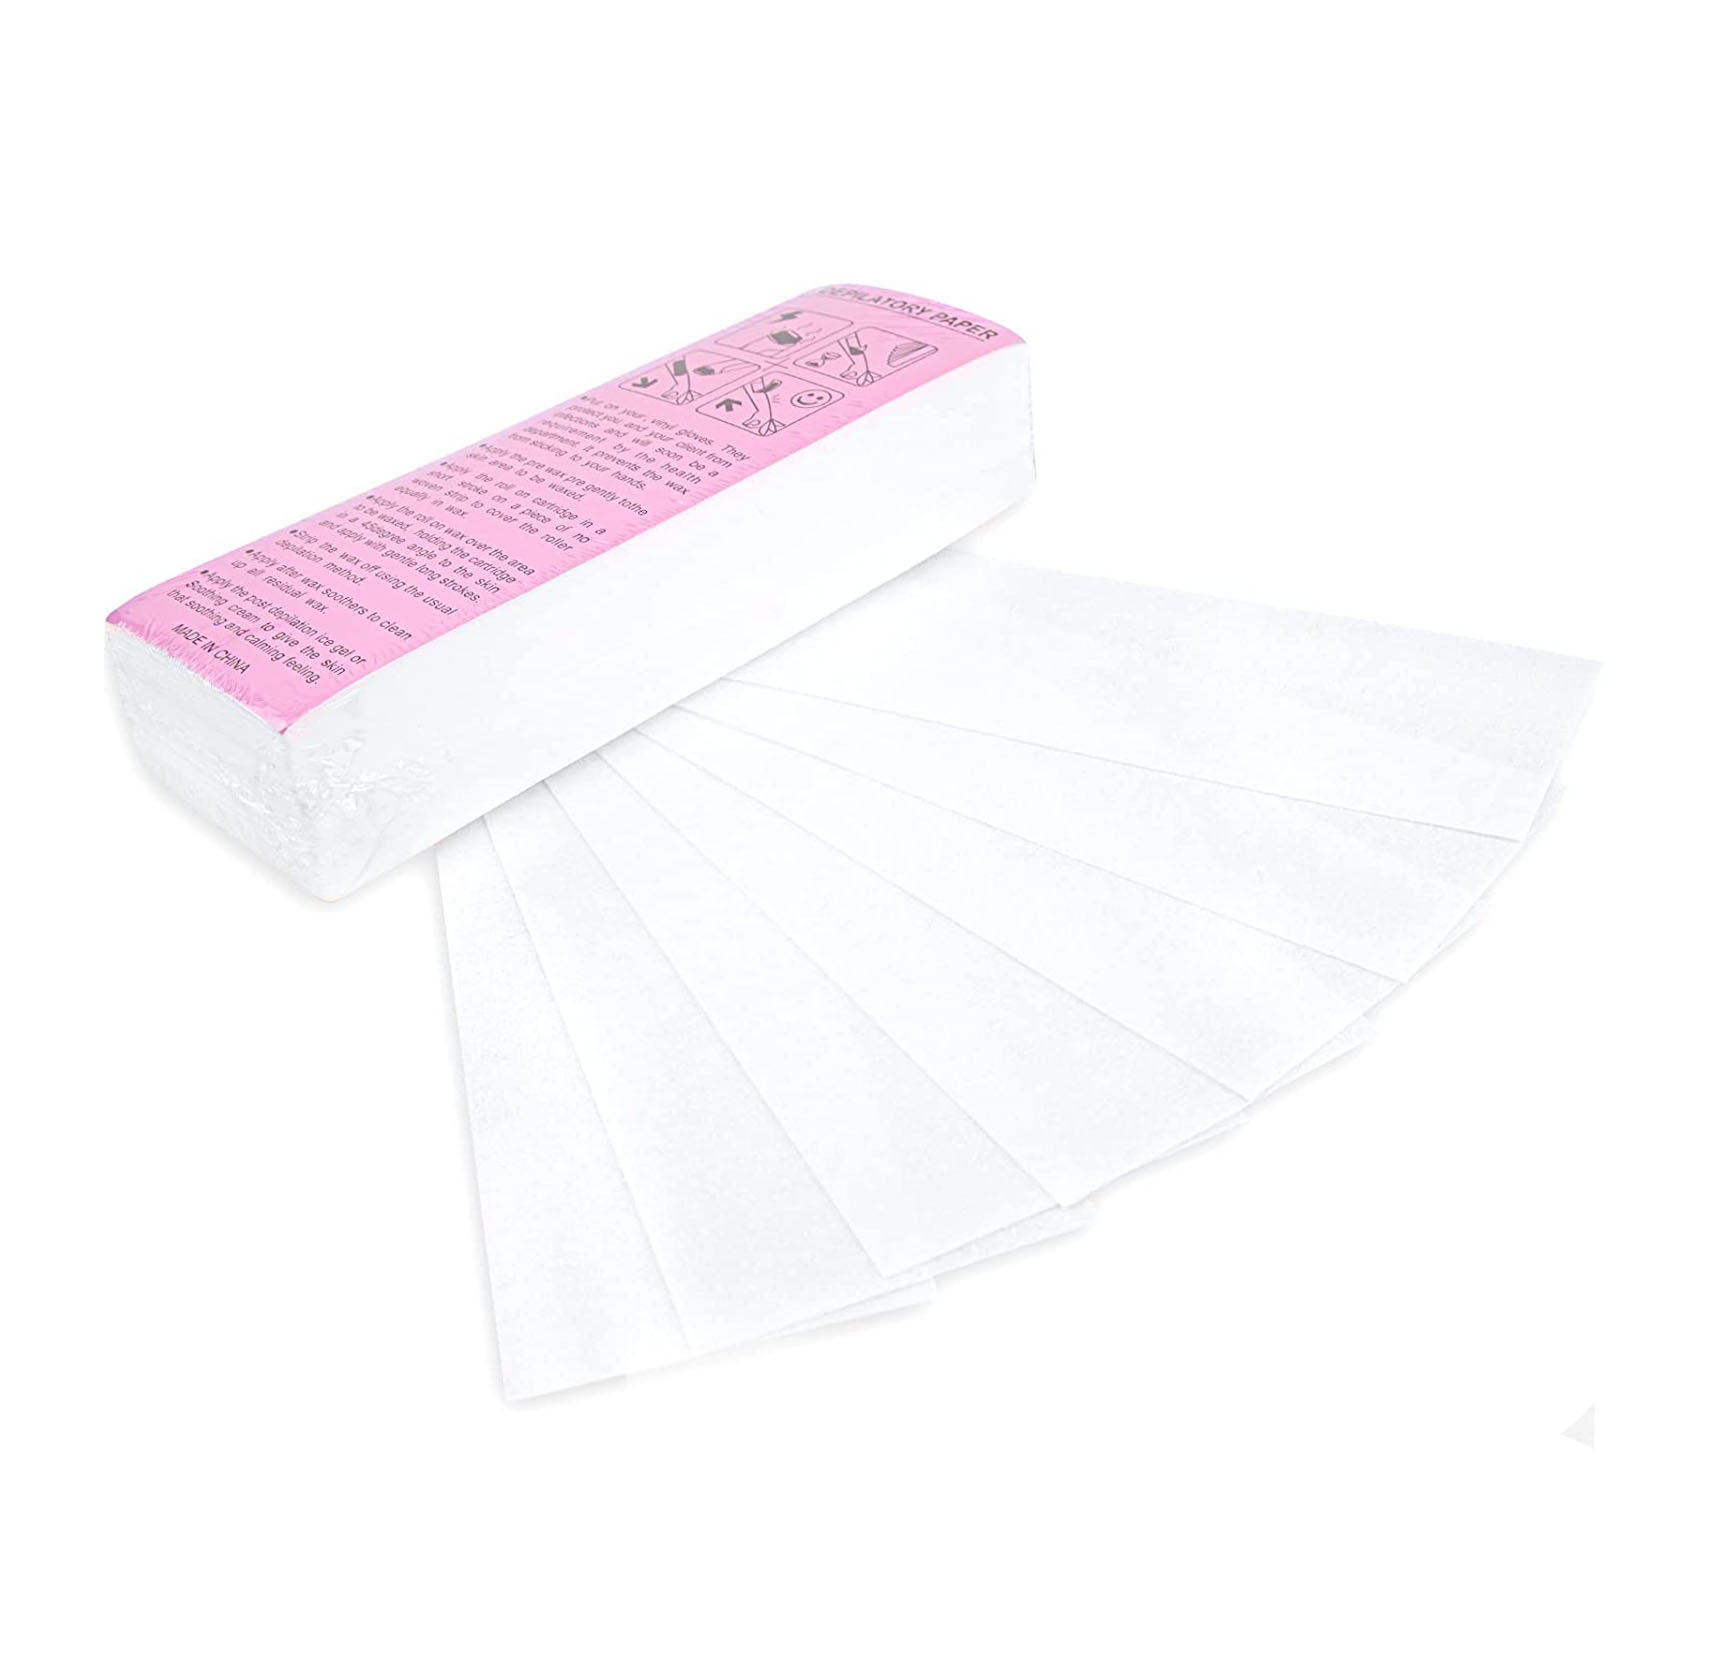 https://www.gabrow.com/wp-content/uploads/2022/04/100-Piece-Non-woven-Waxing-Strips-Hair-Removal-Wax-Paper1-1.jpg